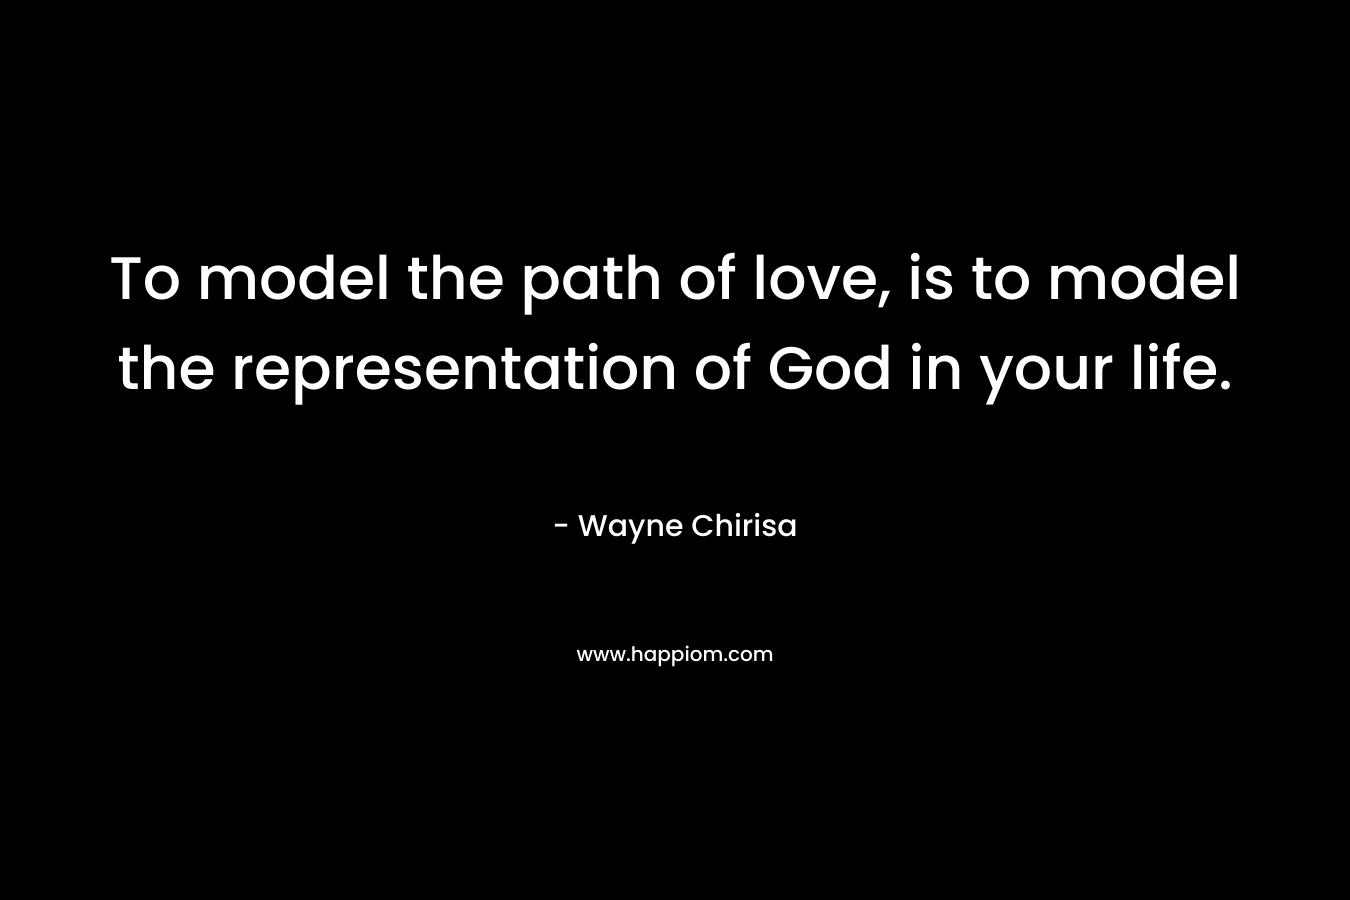 To model the path of love, is to model the representation of God in your life. – Wayne Chirisa